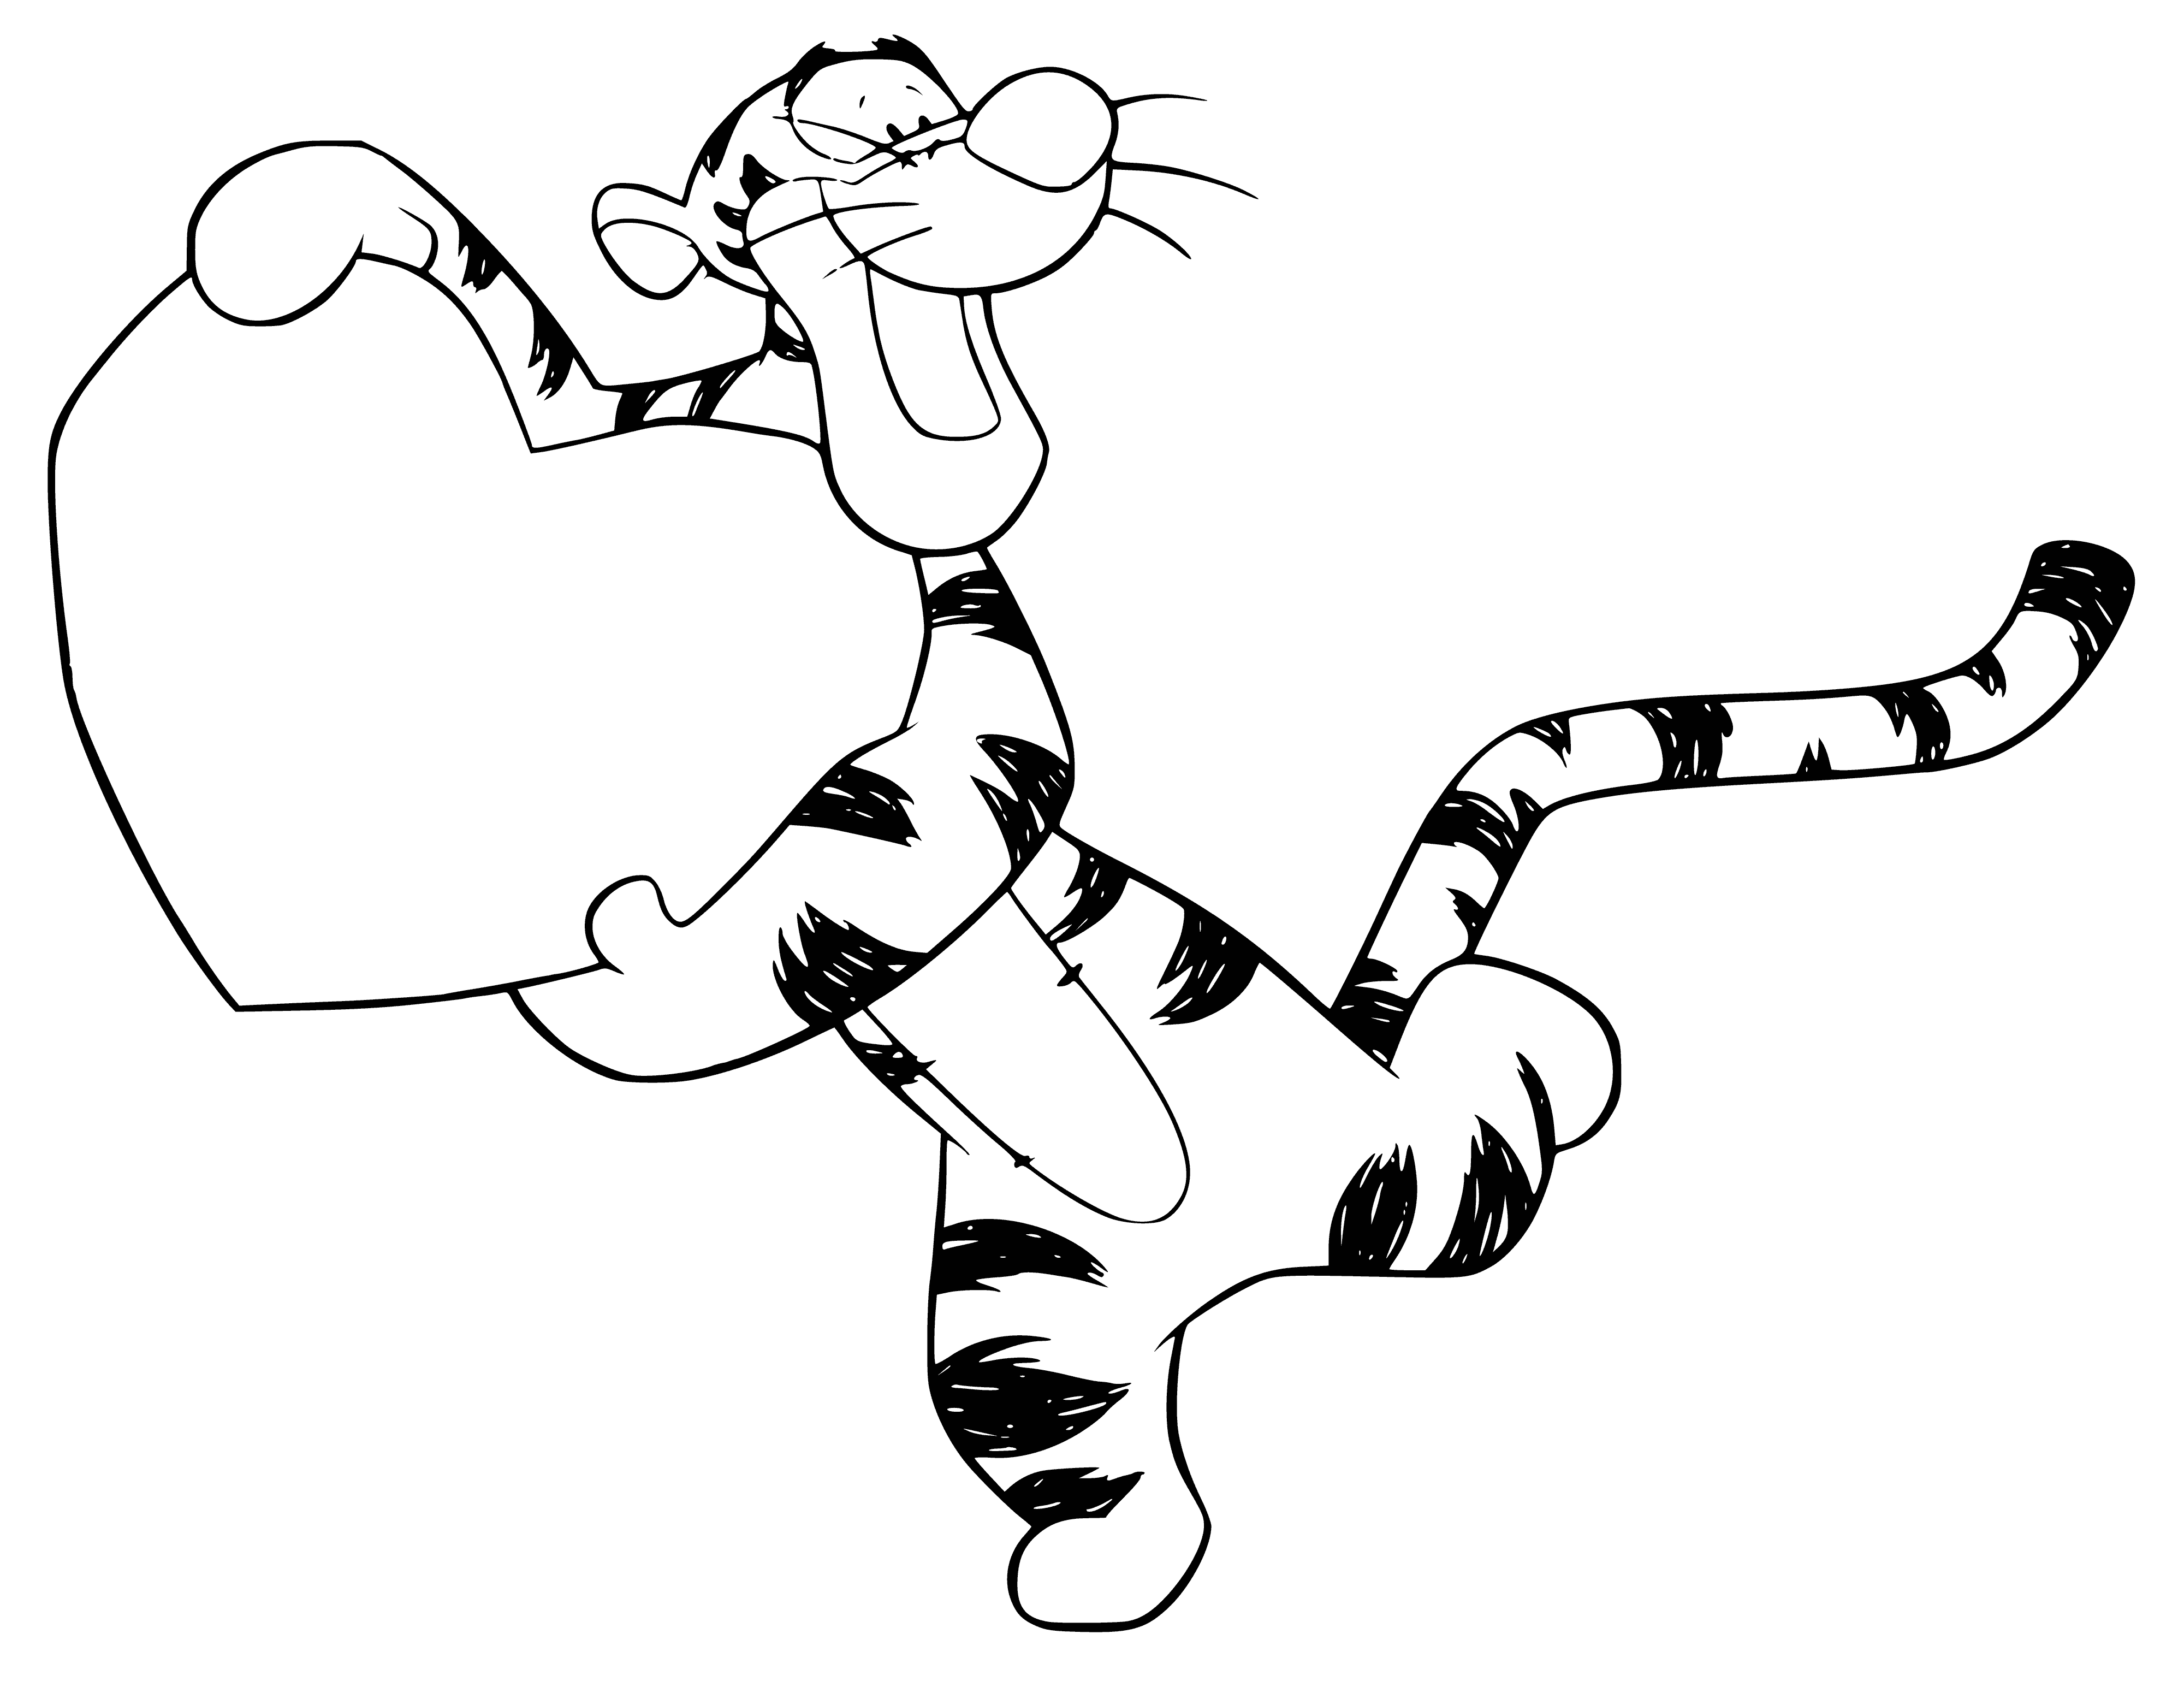 coloring page: Tigger stands with heart in mouth, ribbon tied round it. Red heart has white edge and yellow ribbon. #WinniethePooh